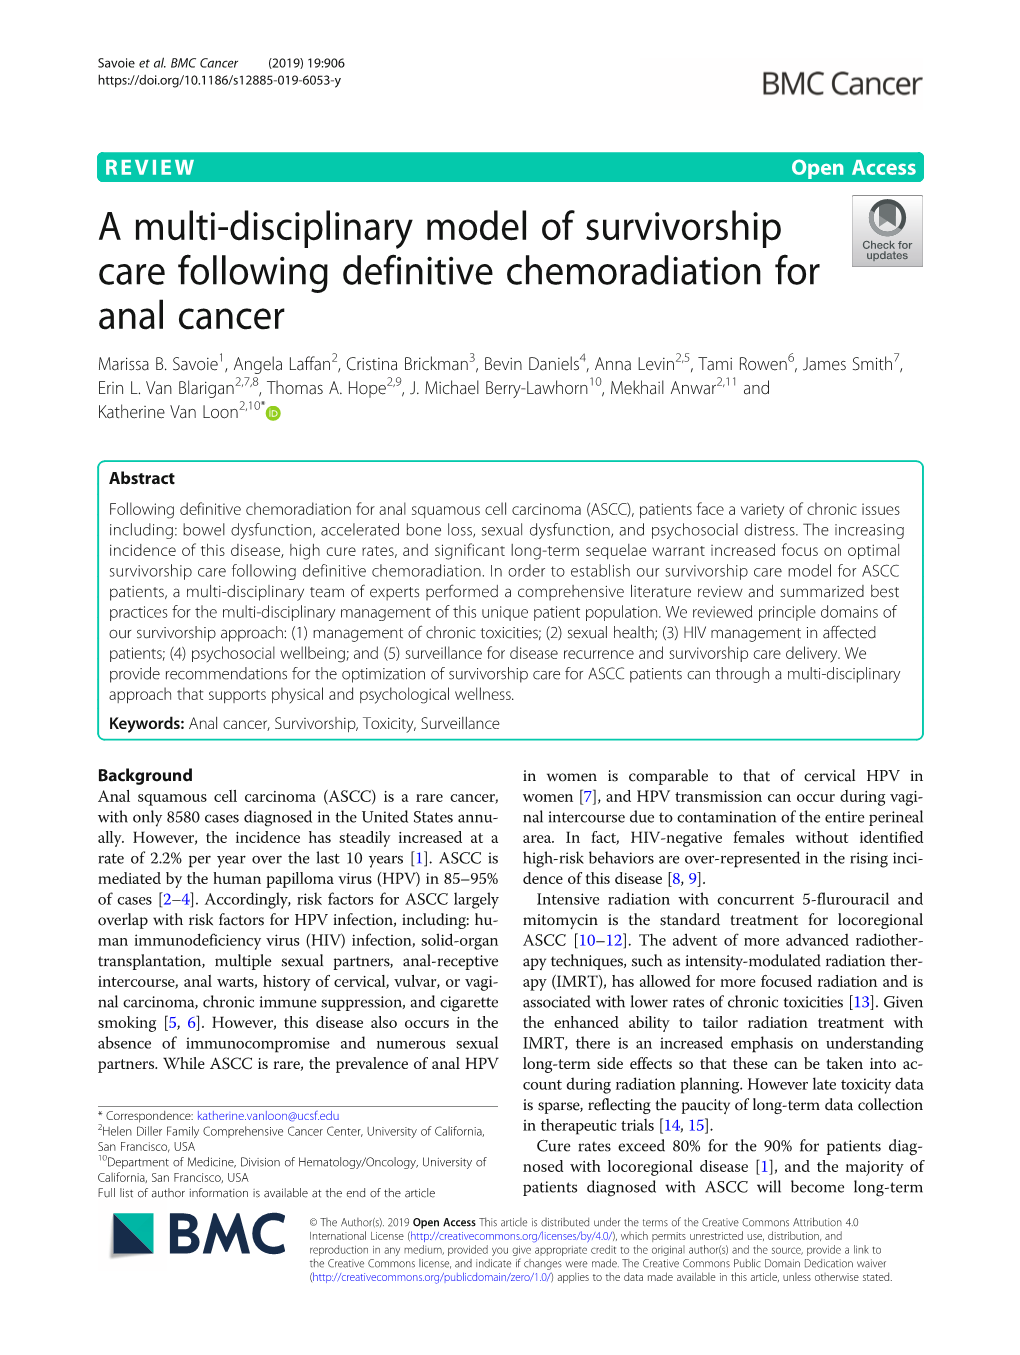 A Multi-Disciplinary Model of Survivorship Care Following Definitive Chemoradiation for Anal Cancer Marissa B